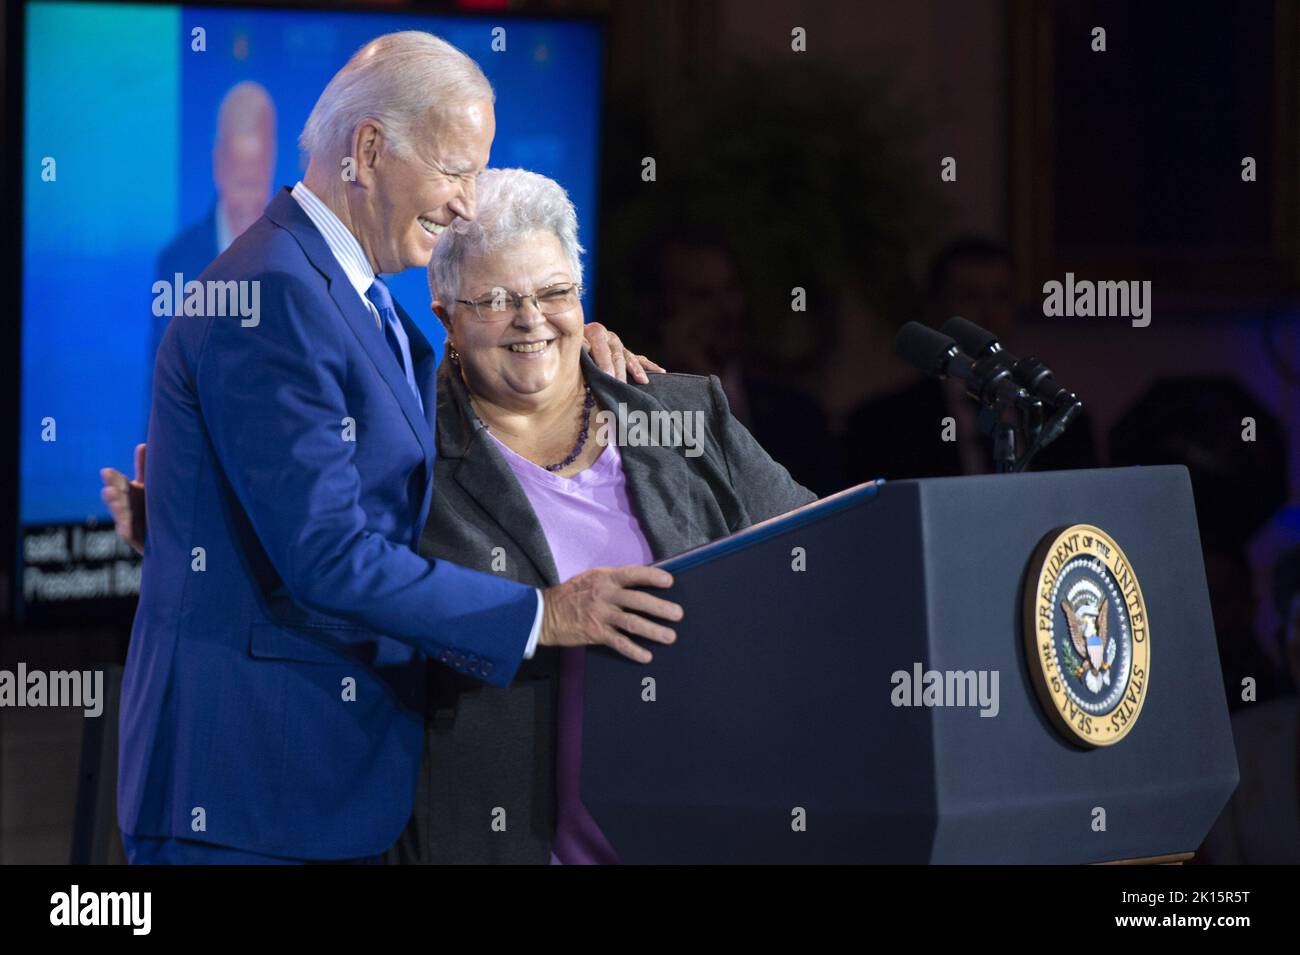 Washington DC, USA. 15th Sep, 2022. President Joe Biden embraces Susan Bro, mother of Heather Hoyer, speaks during the United We Stand Summit which focused government efforts to combat violence and hate crimes in the East Room at the White House in Washington, DC on Thursday, September 15, 2022. Heather Heyer was killed during the Unite The Right rally in Charlottesville, Virginia in 2017. Photo by Bonnie Cash/UPI Credit: UPI/Alamy Live News Stock Photo